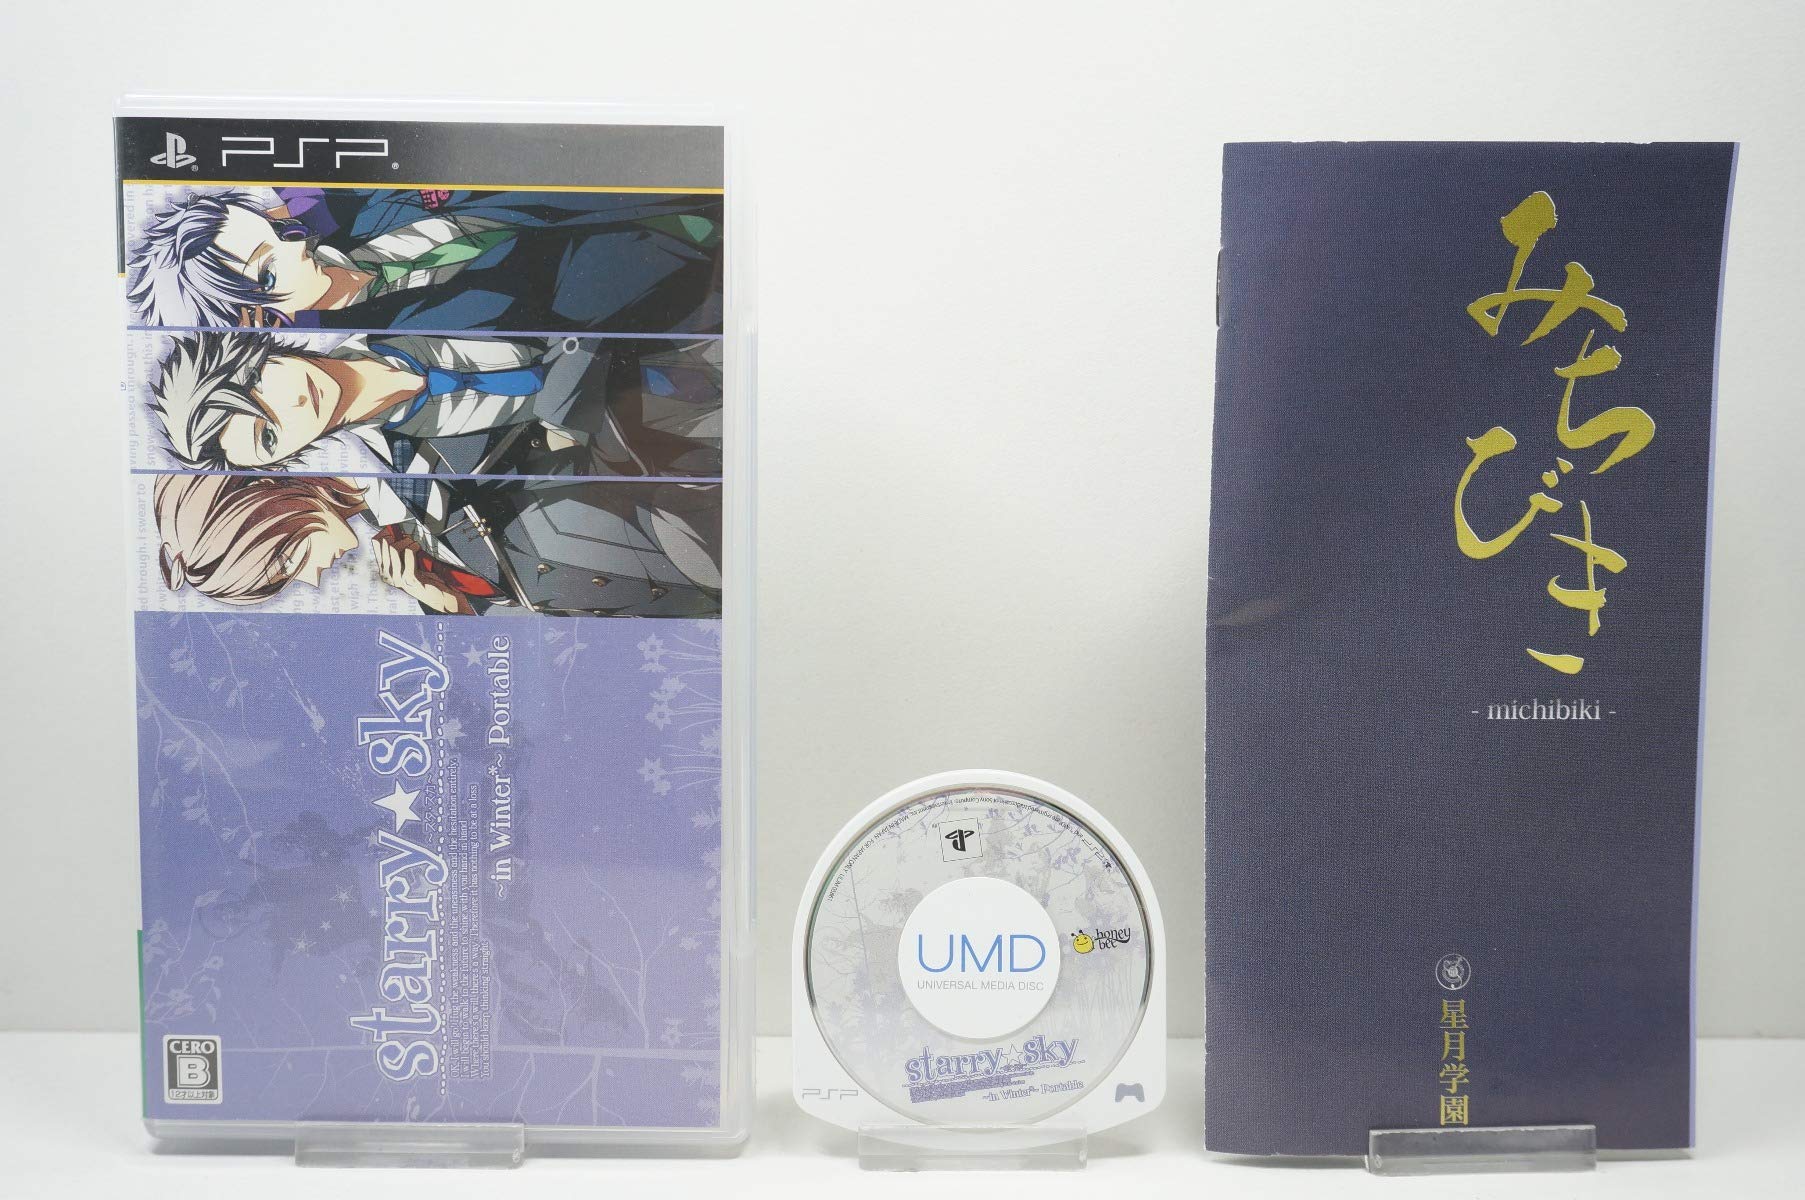 Starry * Sky: In Winter - PSP Edition (japan import)